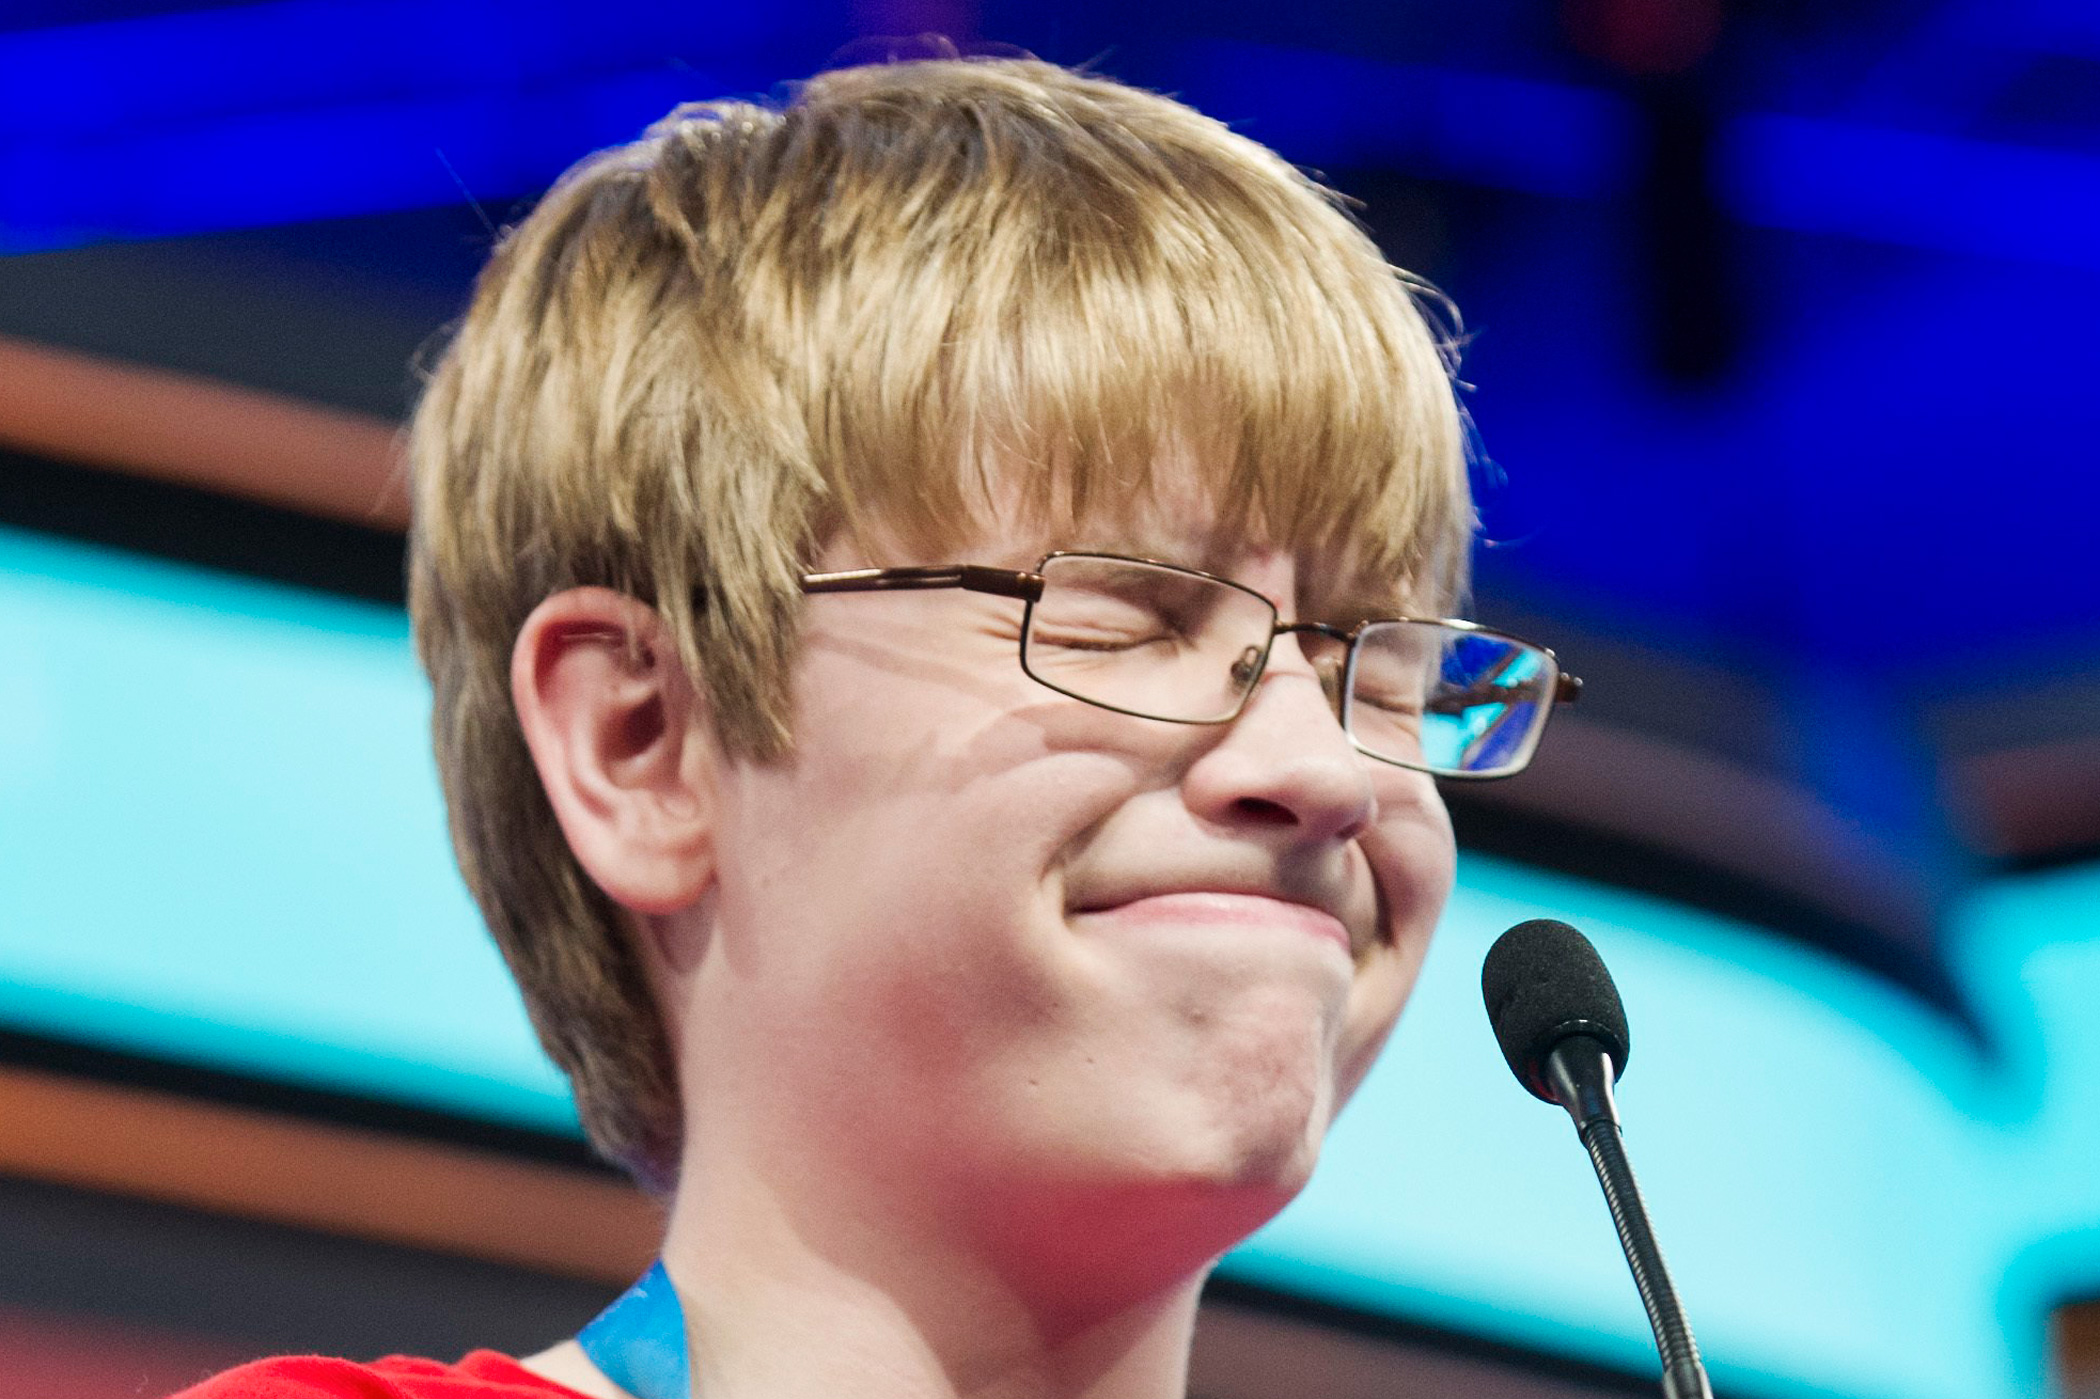 Mark Beaulieu, 13, from Lexington Park, Md., reacts to misspelling his word during the preliminary round three of the Scripps National Spelling Bee in National Harbor, Md., May 25, 2016.